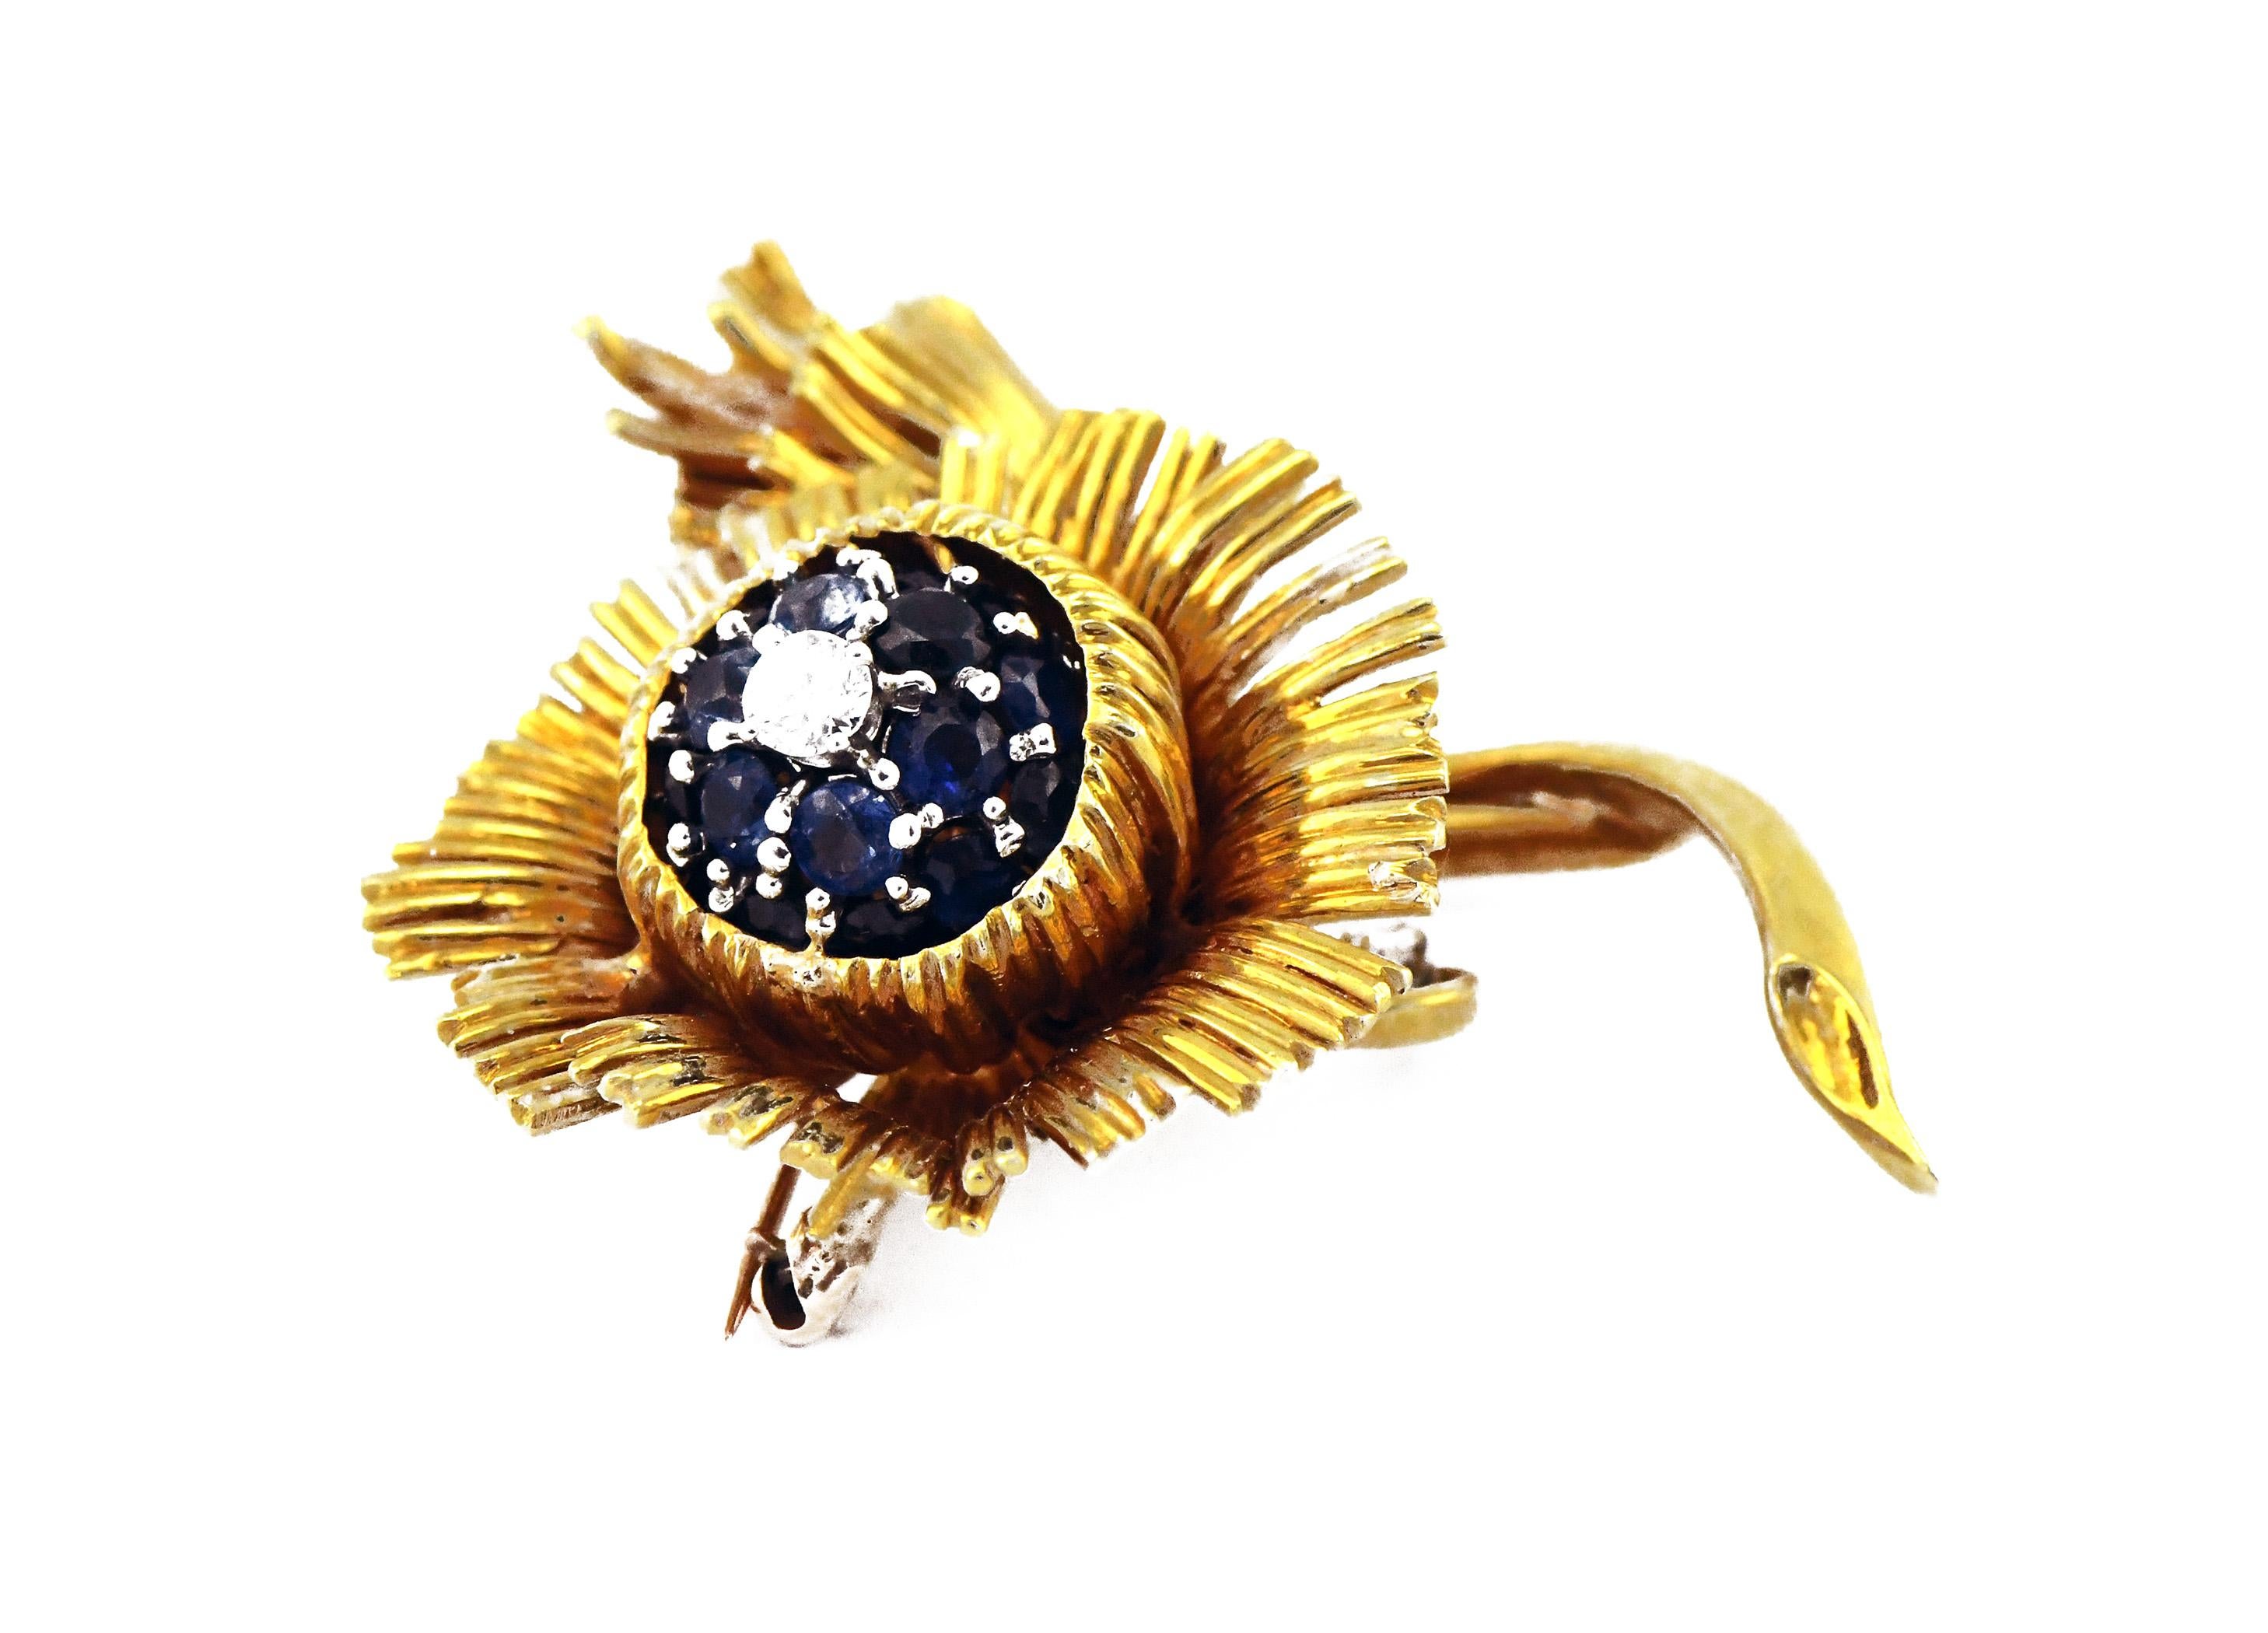 Erwin Pearl floral Pin Broach 32.9 Grams of solid 18kt gold set with six round brilliant natural sapphires and two round brilliant diamonds all excellent quality (Very slightly included E-F color). Superb detail! Estimated 22pt. center diamond and